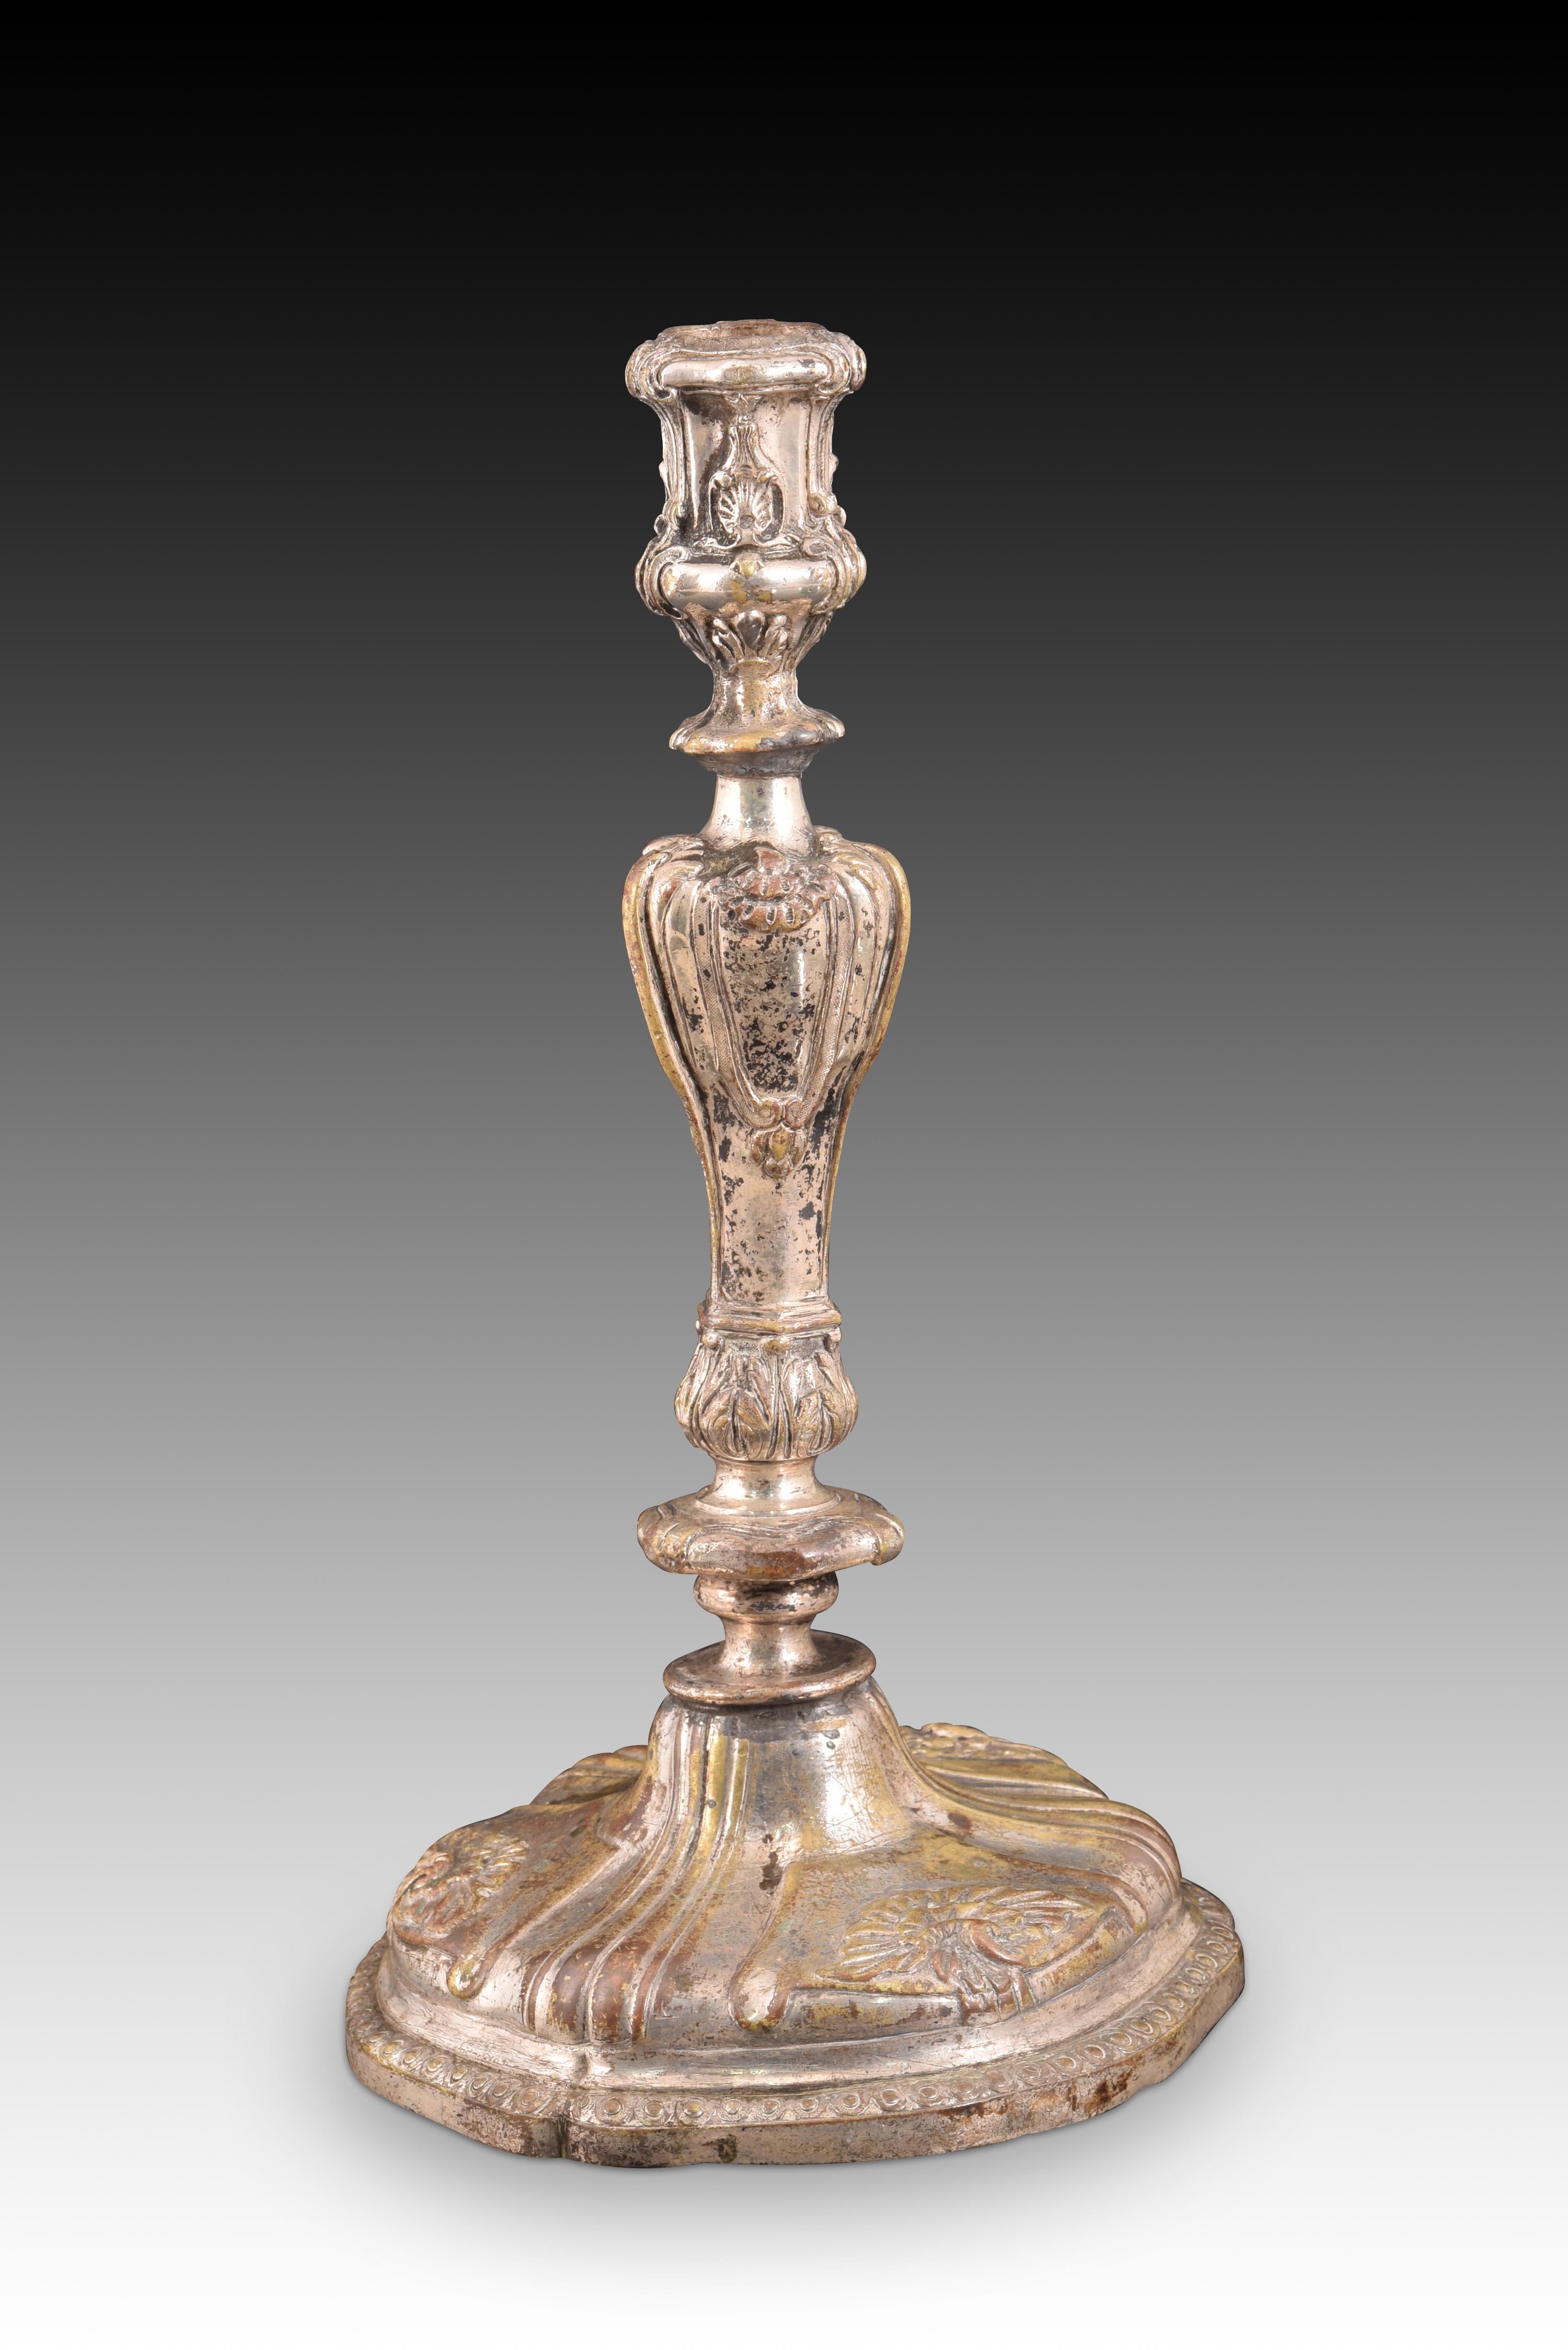 Candlestick or candle holder. Bronze. 19th century.
Bronze candlestick decorated with vegetal and venerated elements in light relief. Both the base and the axis or balustraded foot with a disc and the upper part present a series of curves in their